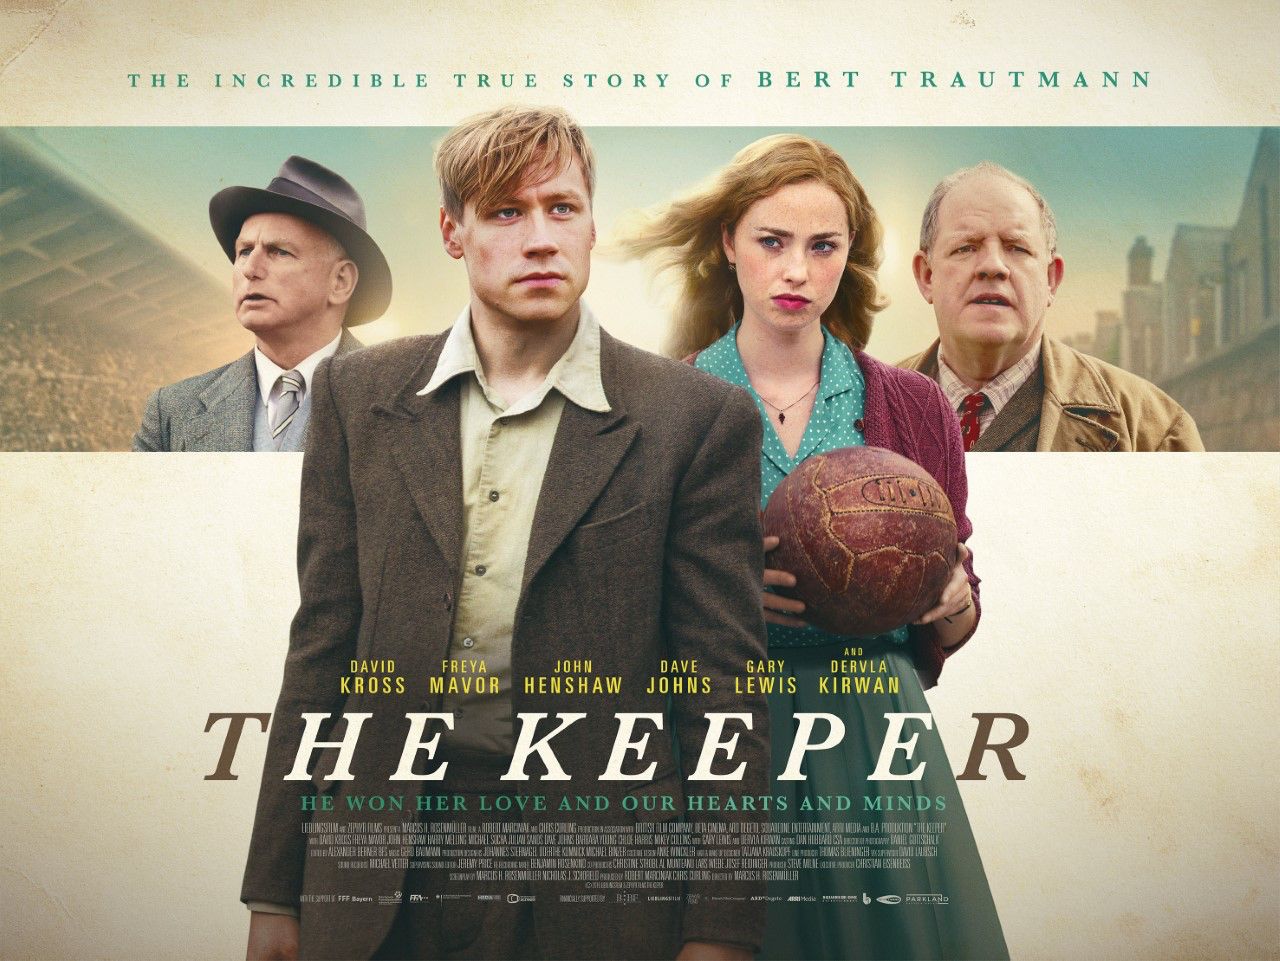 THE KEEPER